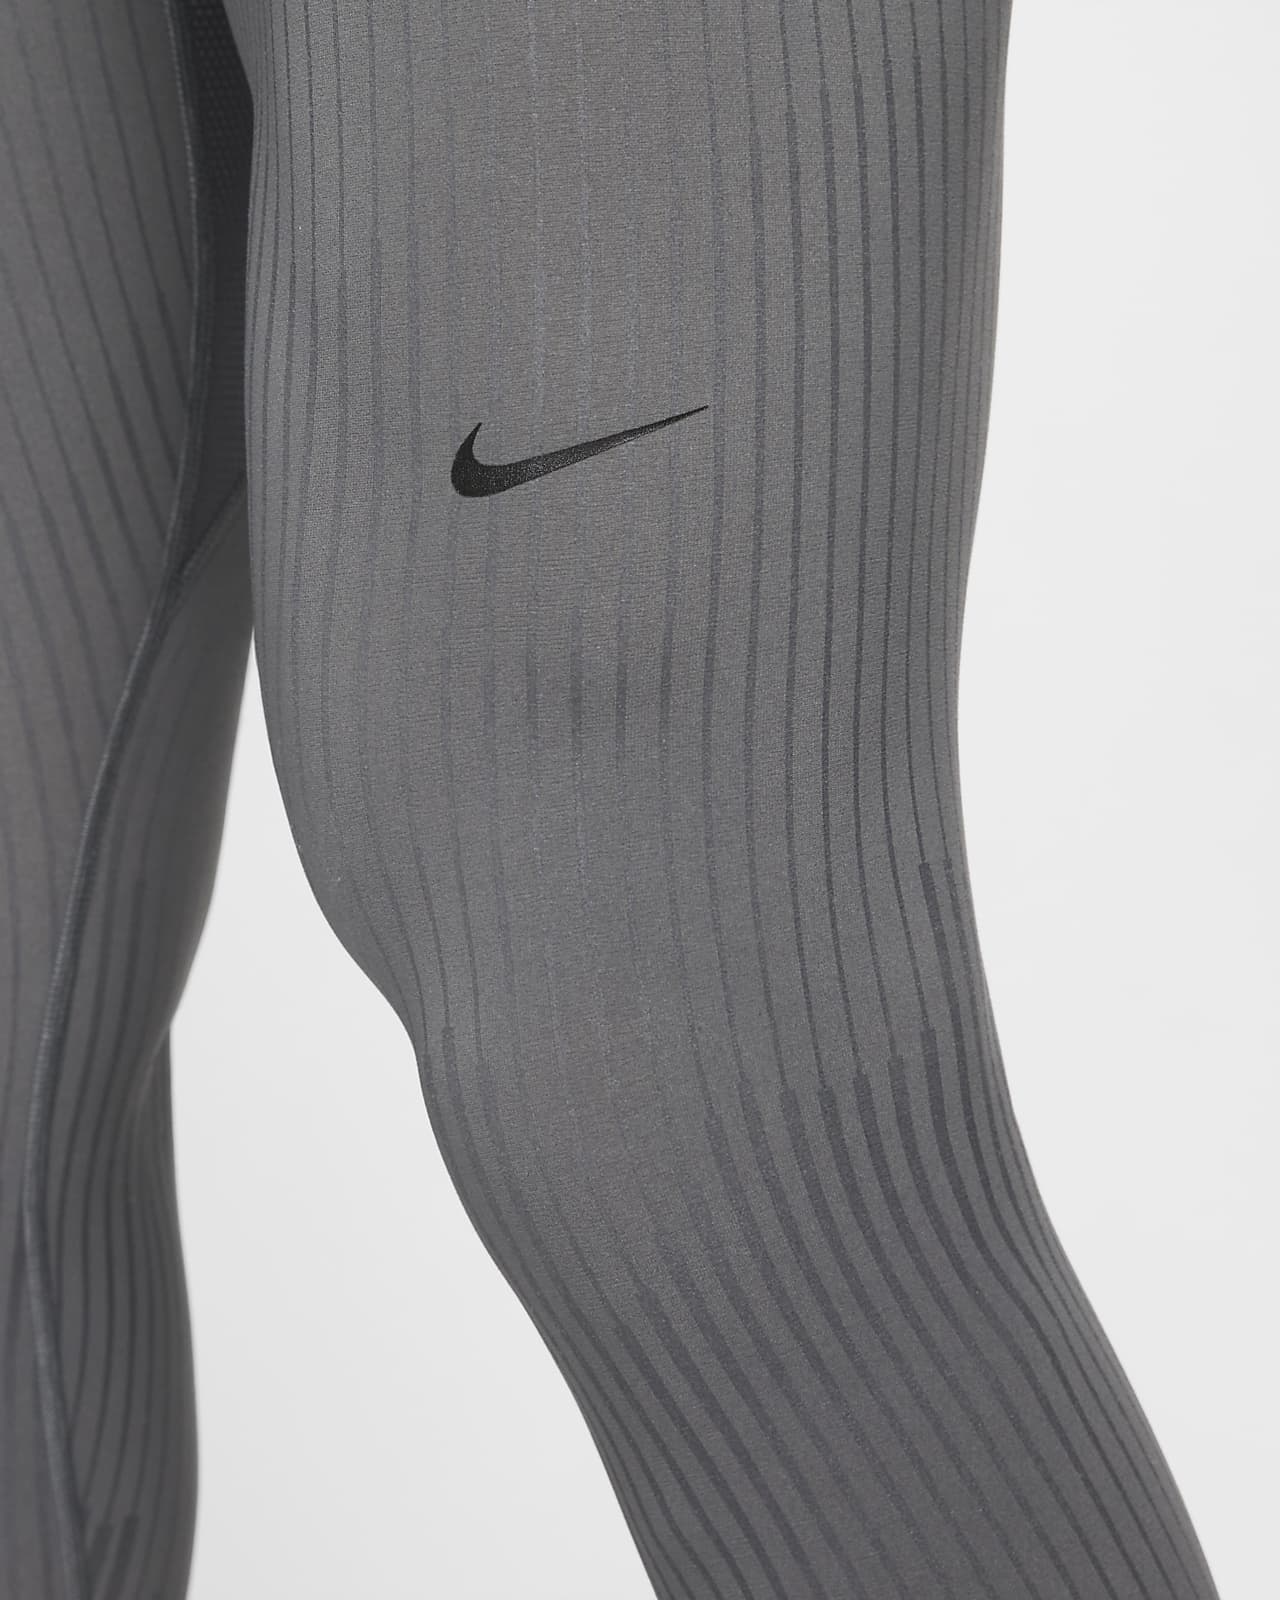  Nike Men's Pro Tights Black/Anthracite/White Size X-Large :  Clothing, Shoes & Jewelry